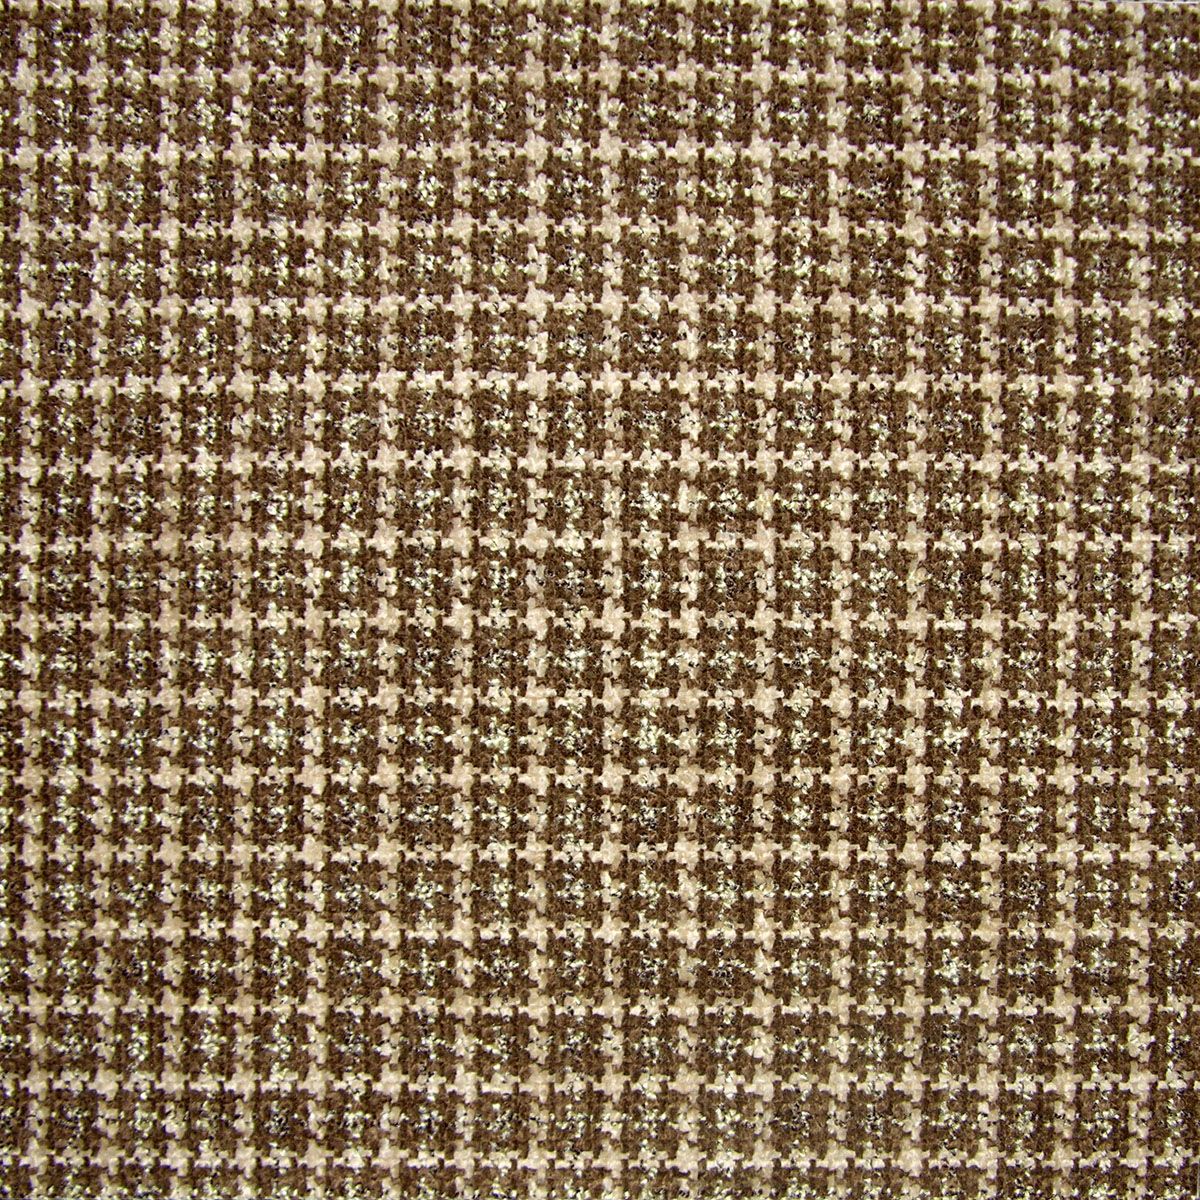 Nairn fabric in mocha color - pattern number LW E2003026 - by Scalamandre in the Old World Weavers collection